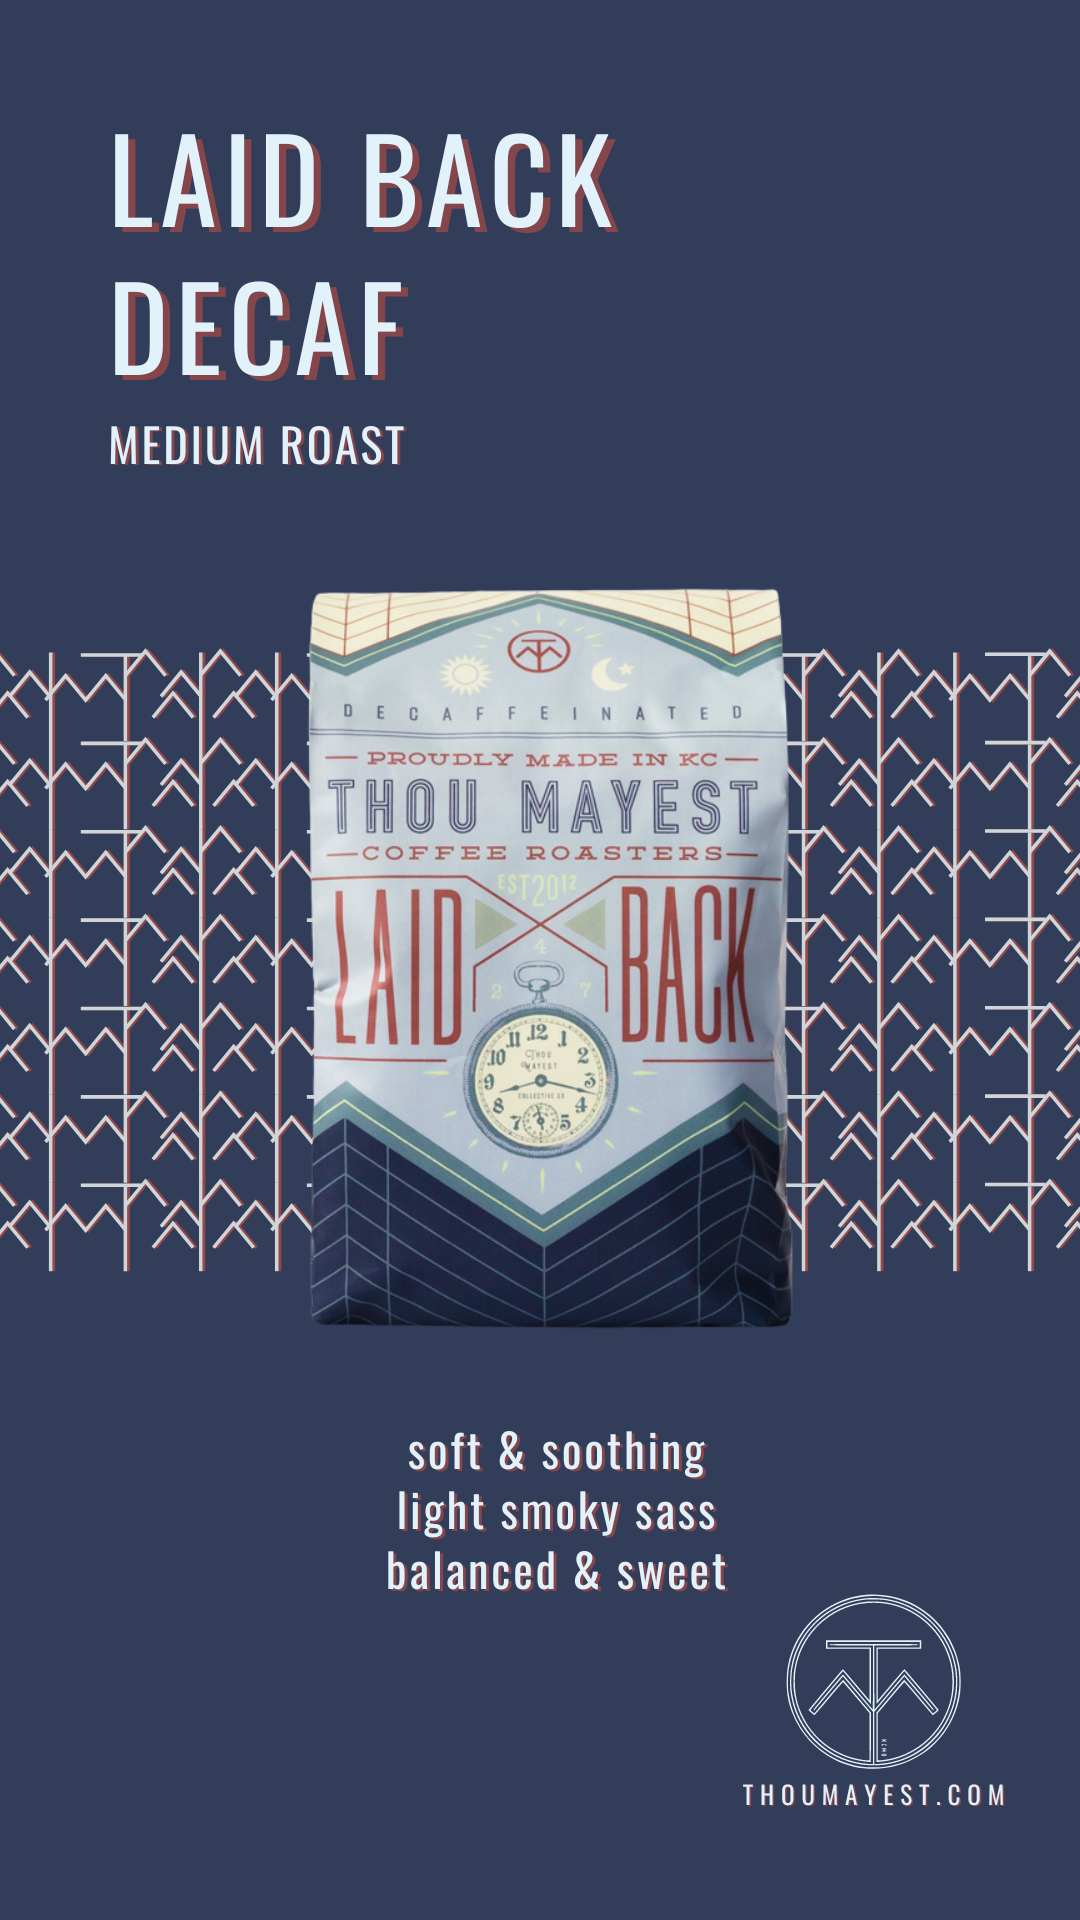 Image of our Laid Back Decaf coffee bag with description - decaf, medium roast, soft & soothing, light smoky sass, balanced & sweet. Click the image to view the product page.